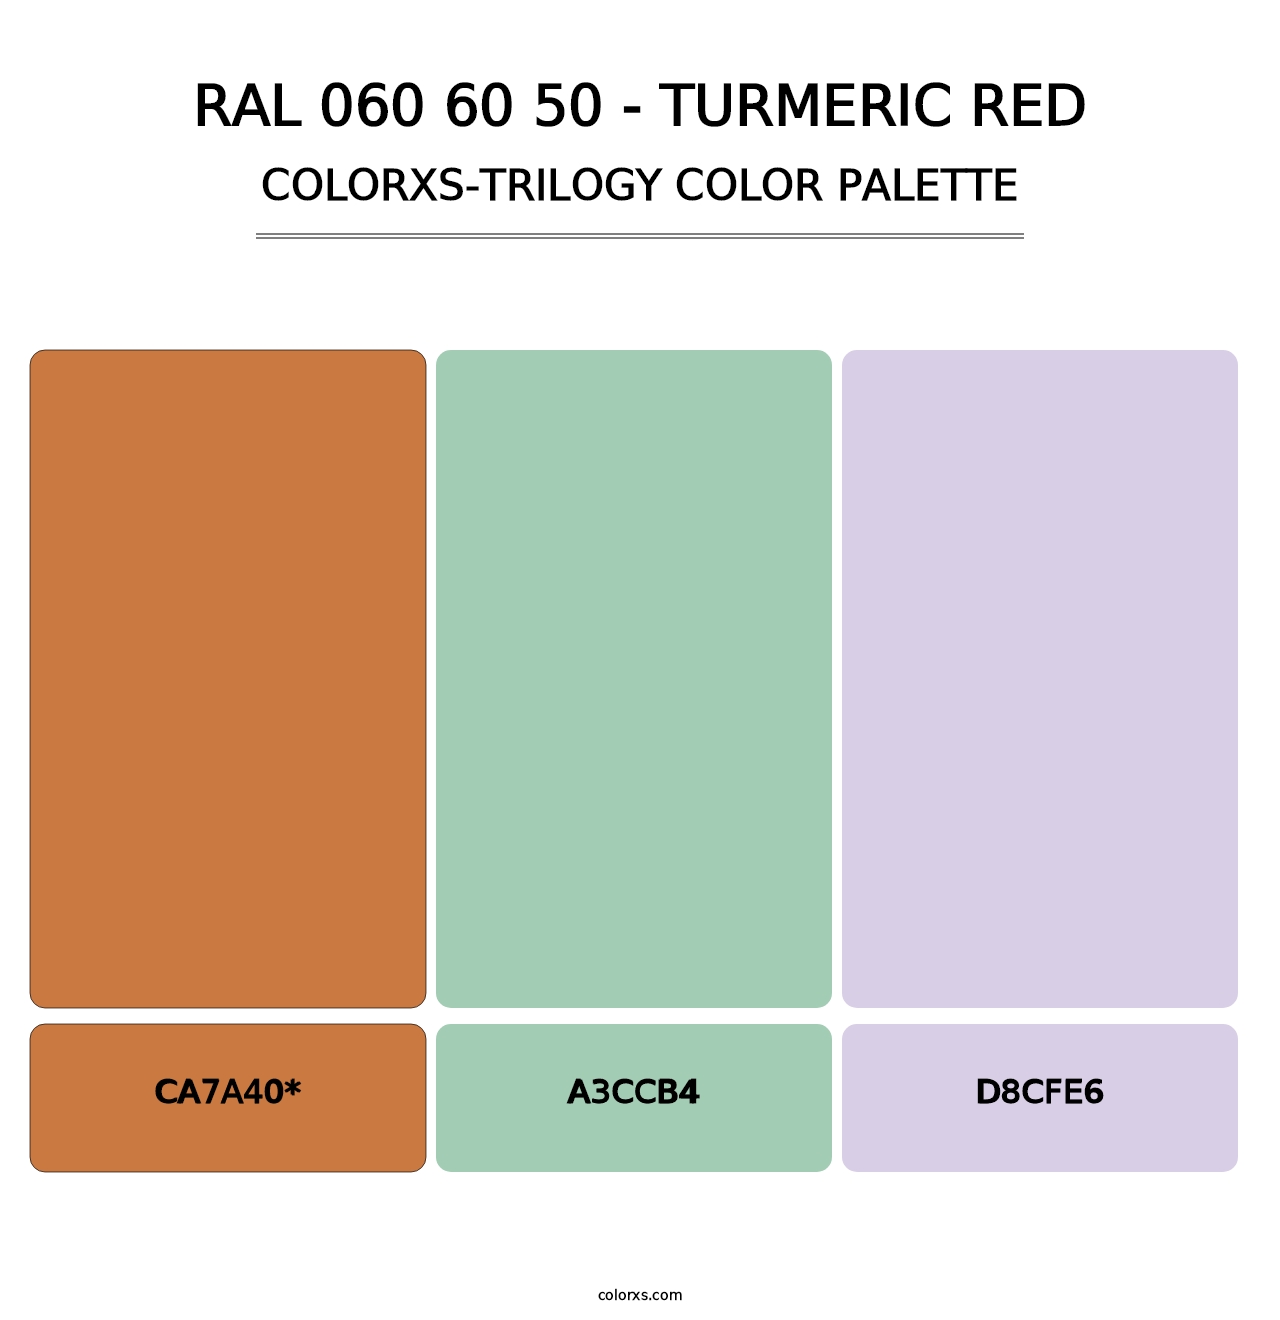 RAL 060 60 50 - Turmeric Red - Colorxs Trilogy Palette